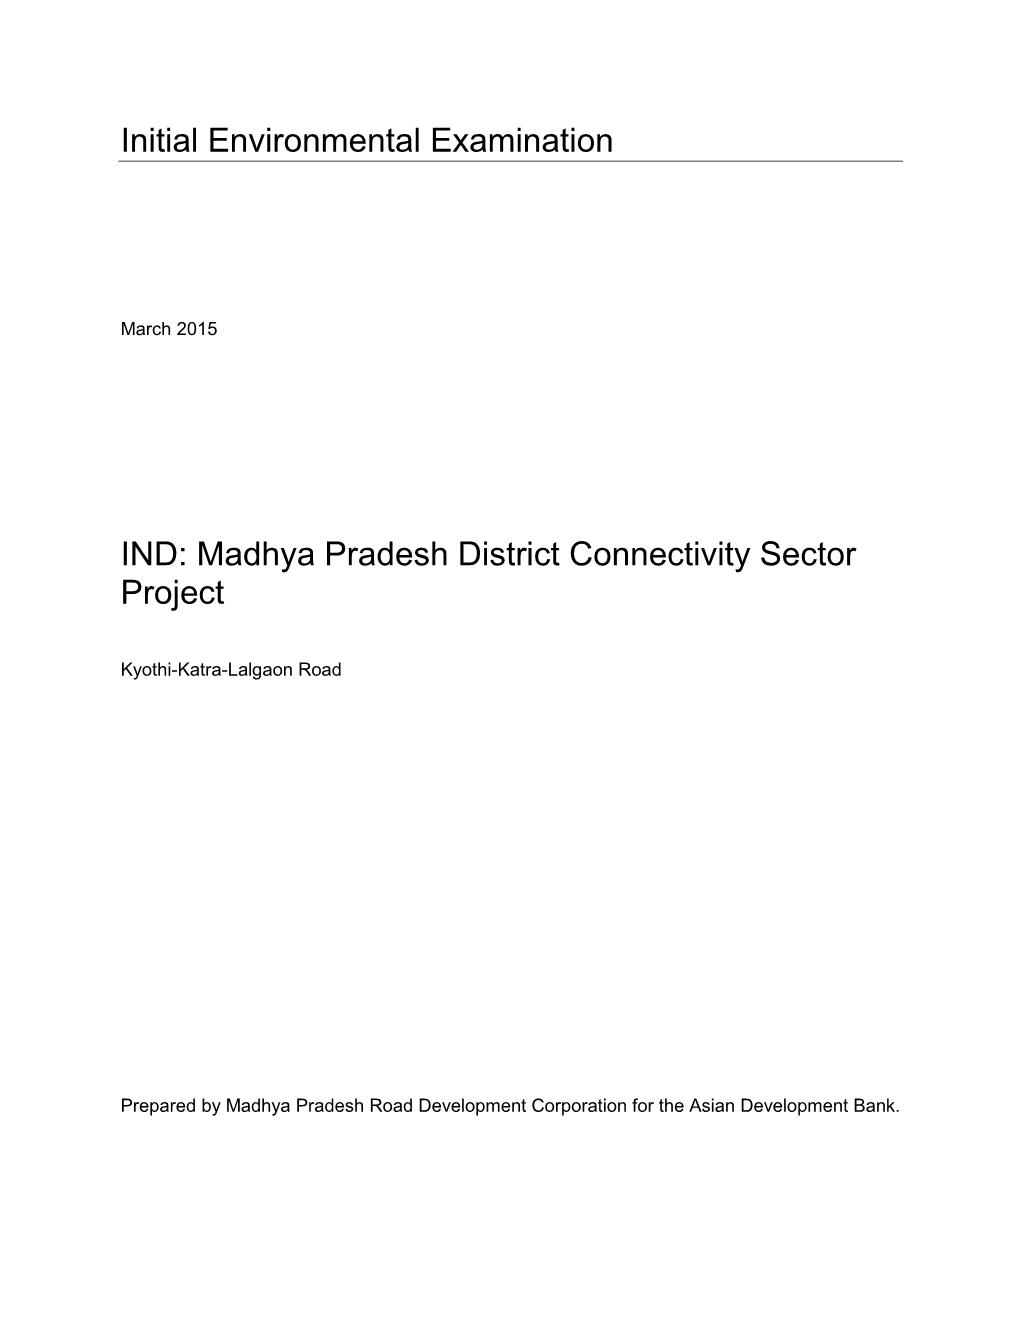 Madhya Pradesh District Connectivity Sector Project